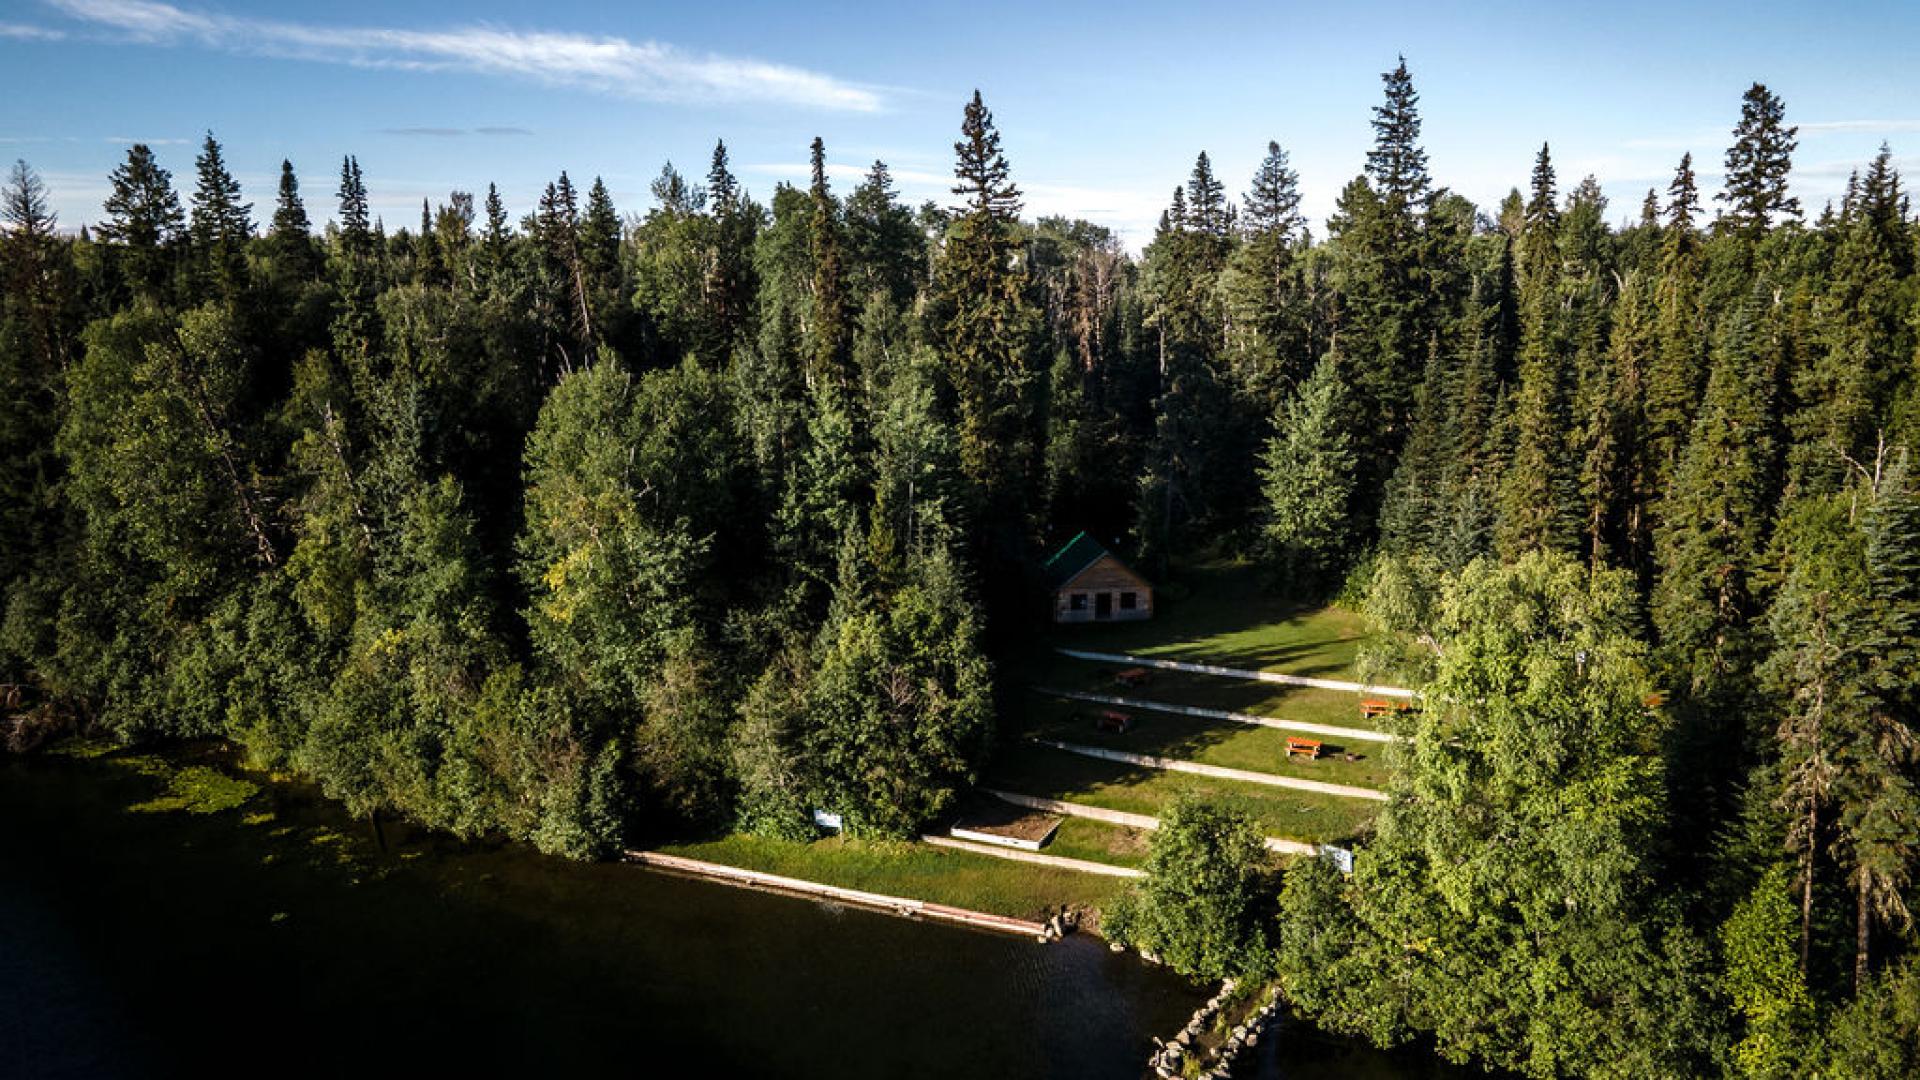 grassy area on a lake surrounded by evergreen trees